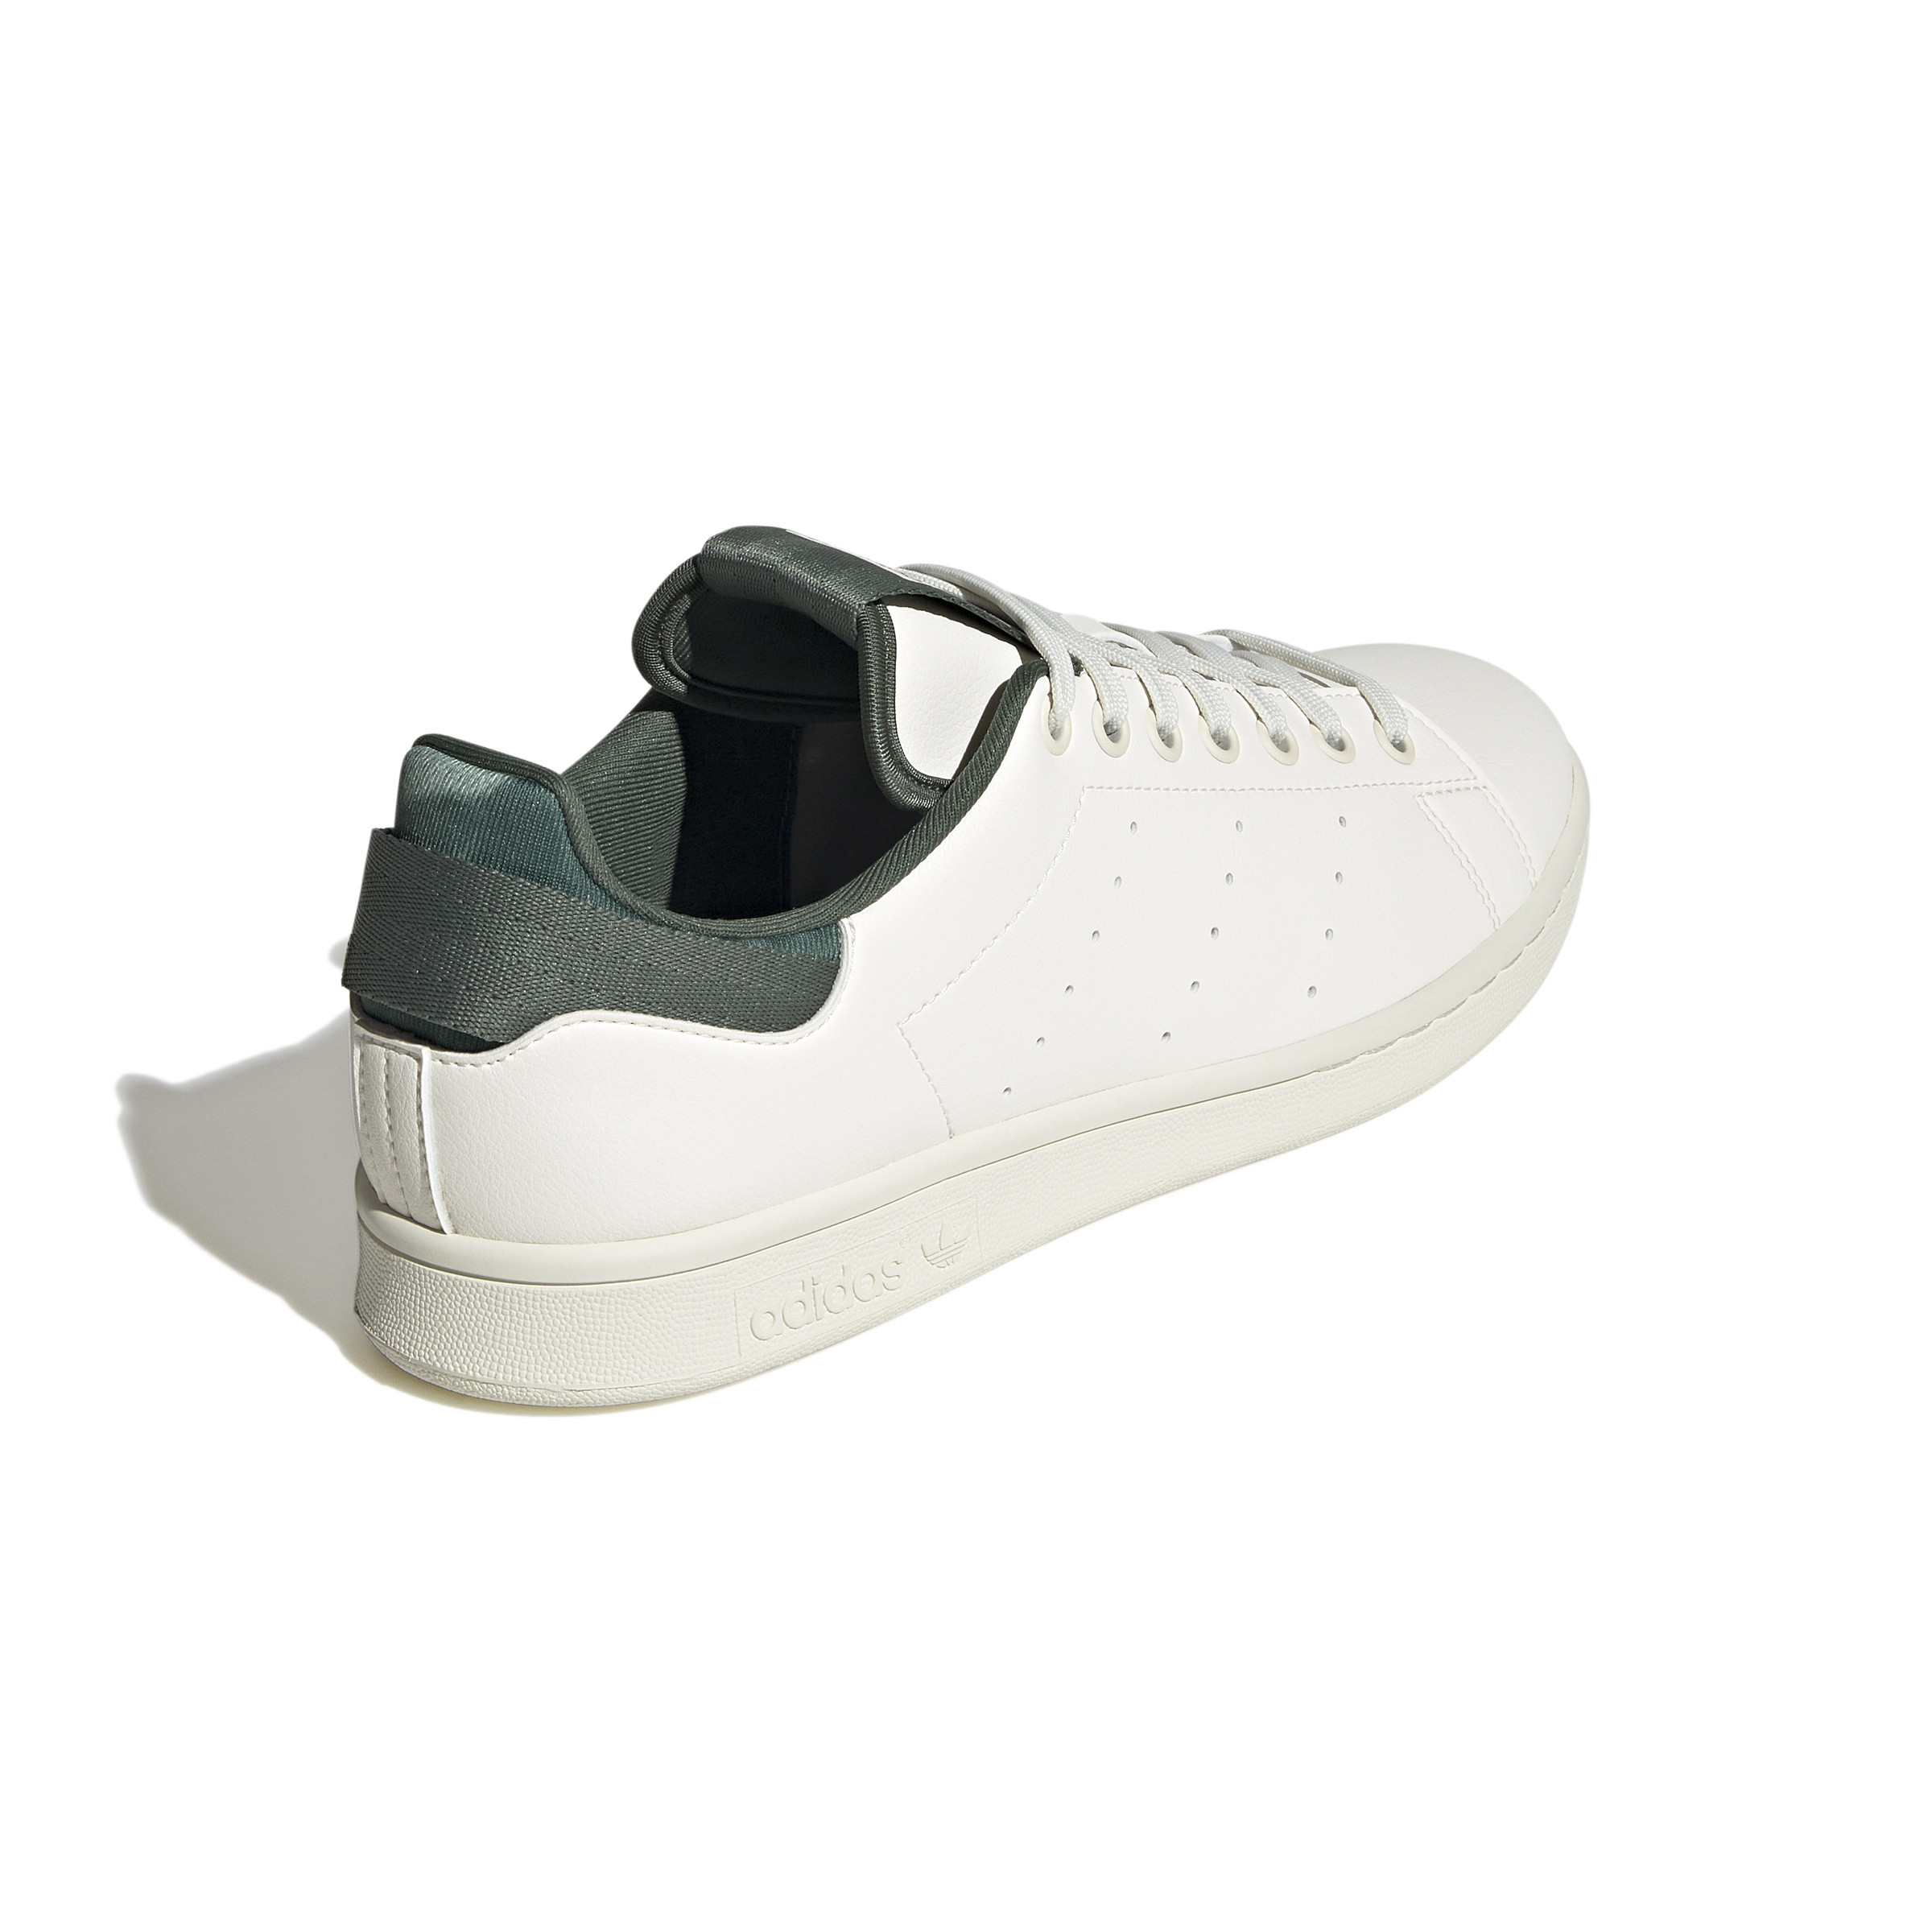 Adidas - Stan Smith Parley Shoes, White, large image number 5